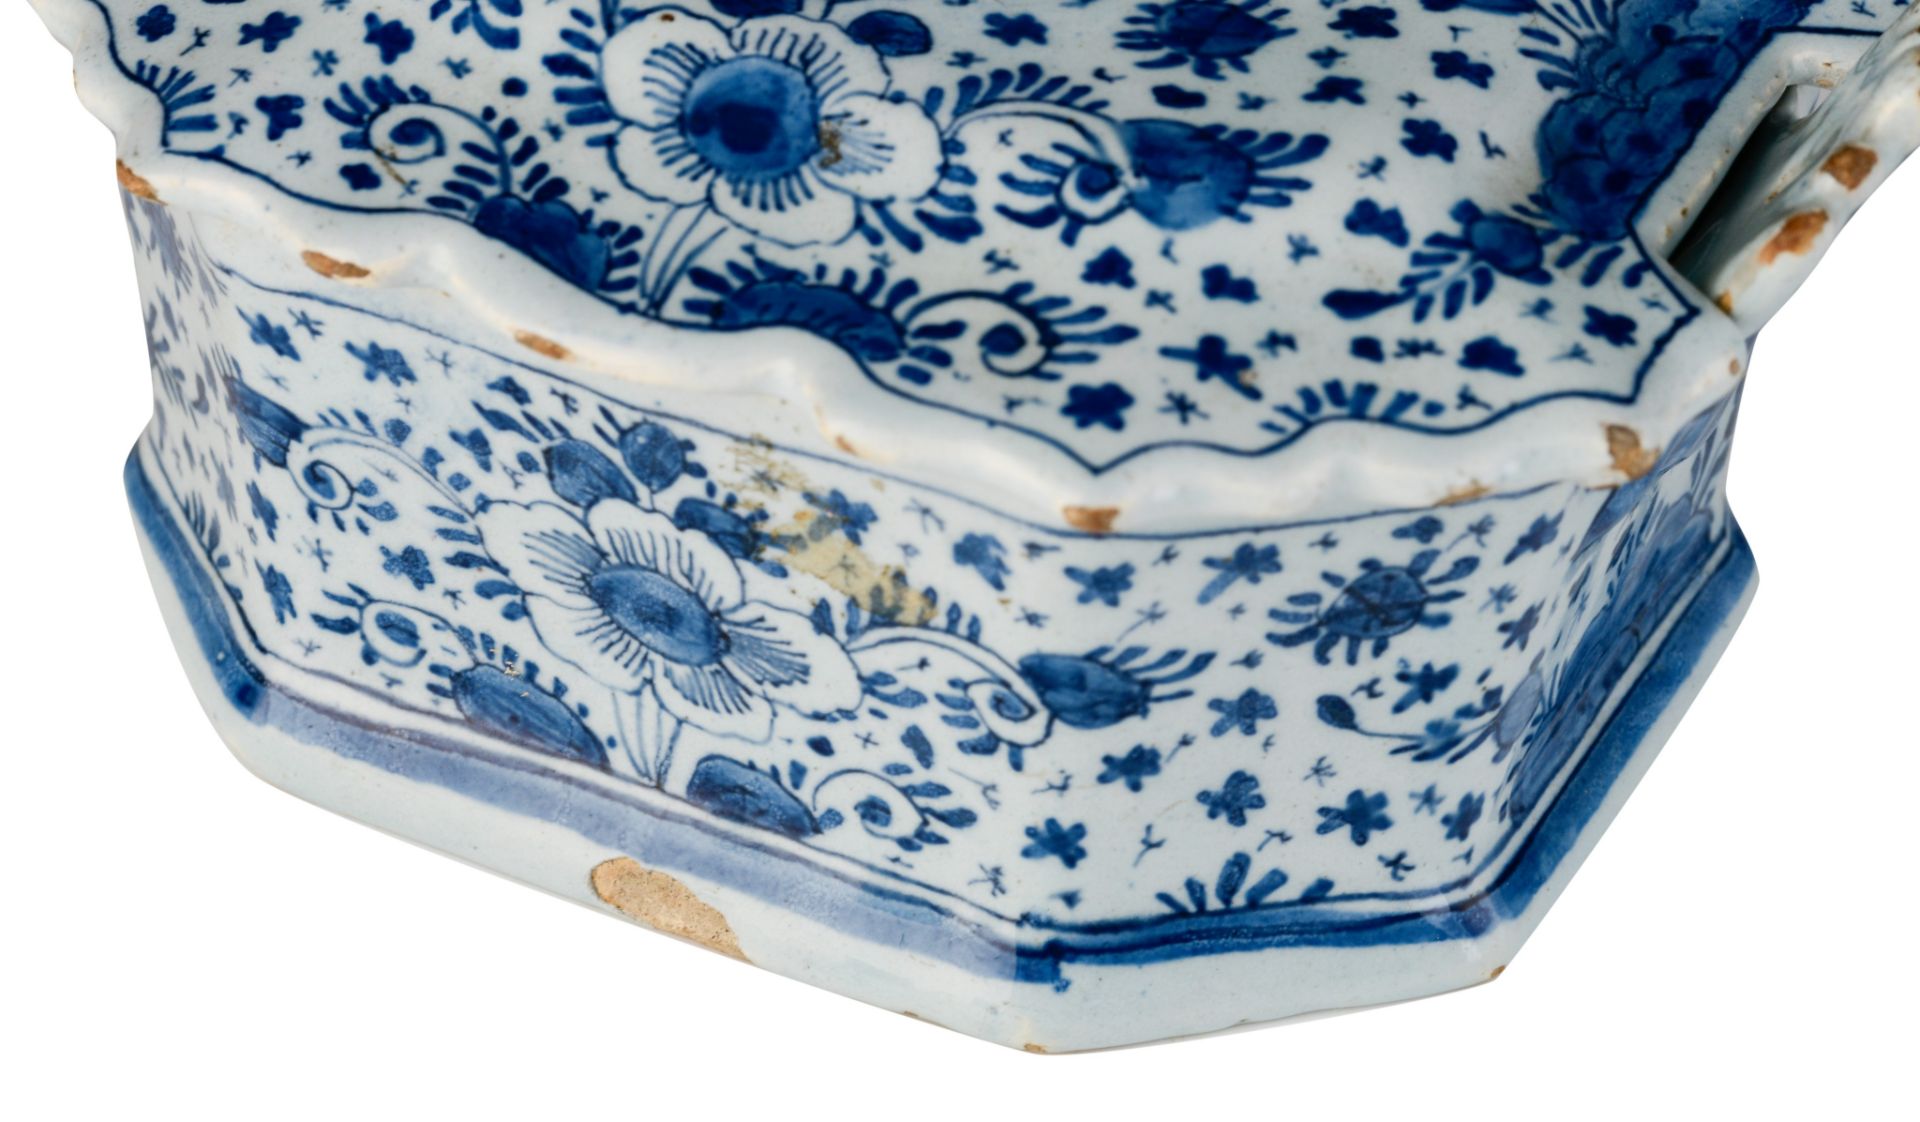 (BIDDING ONLY ON CARLOBONTE.BE) A fine Delft blue and white butter tub, marked 'De Lampetkan', 18thC - Image 13 of 14